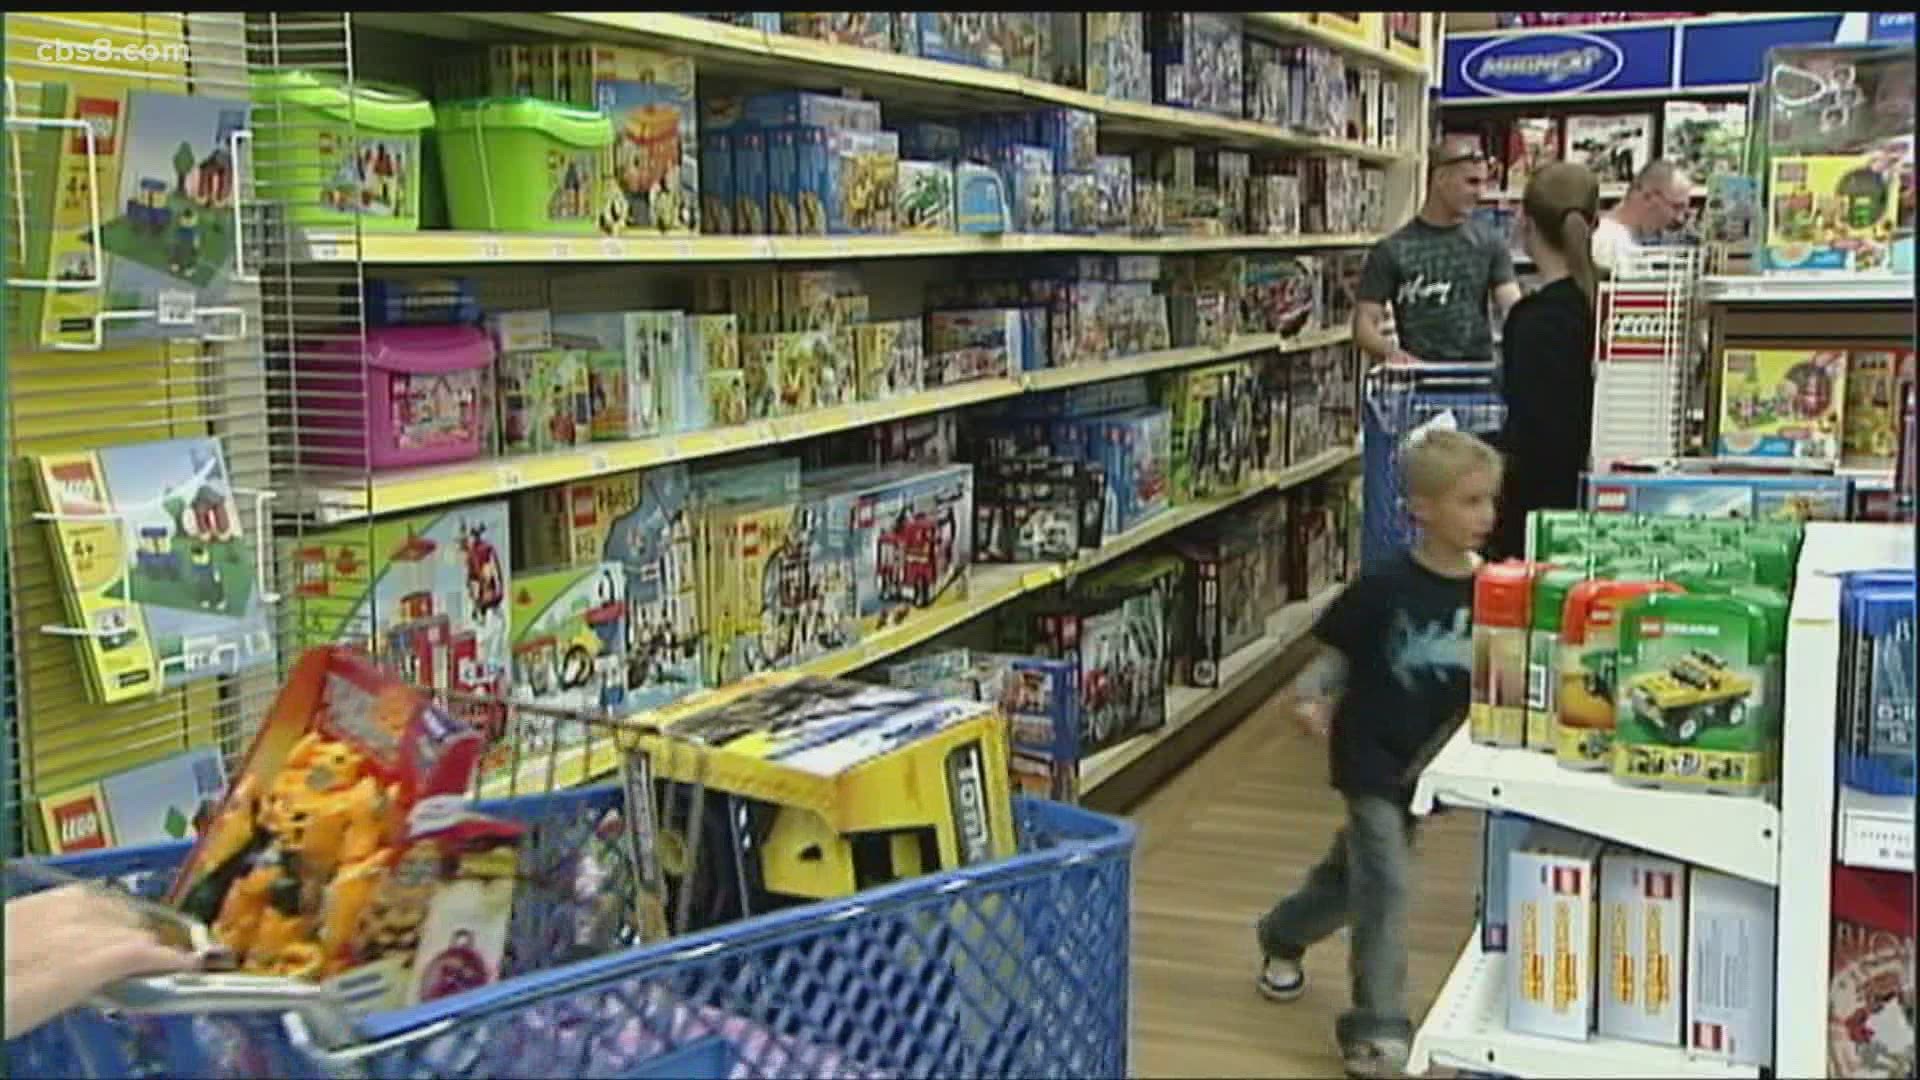 The legislation would remove "boys" and "girls" toy sections.